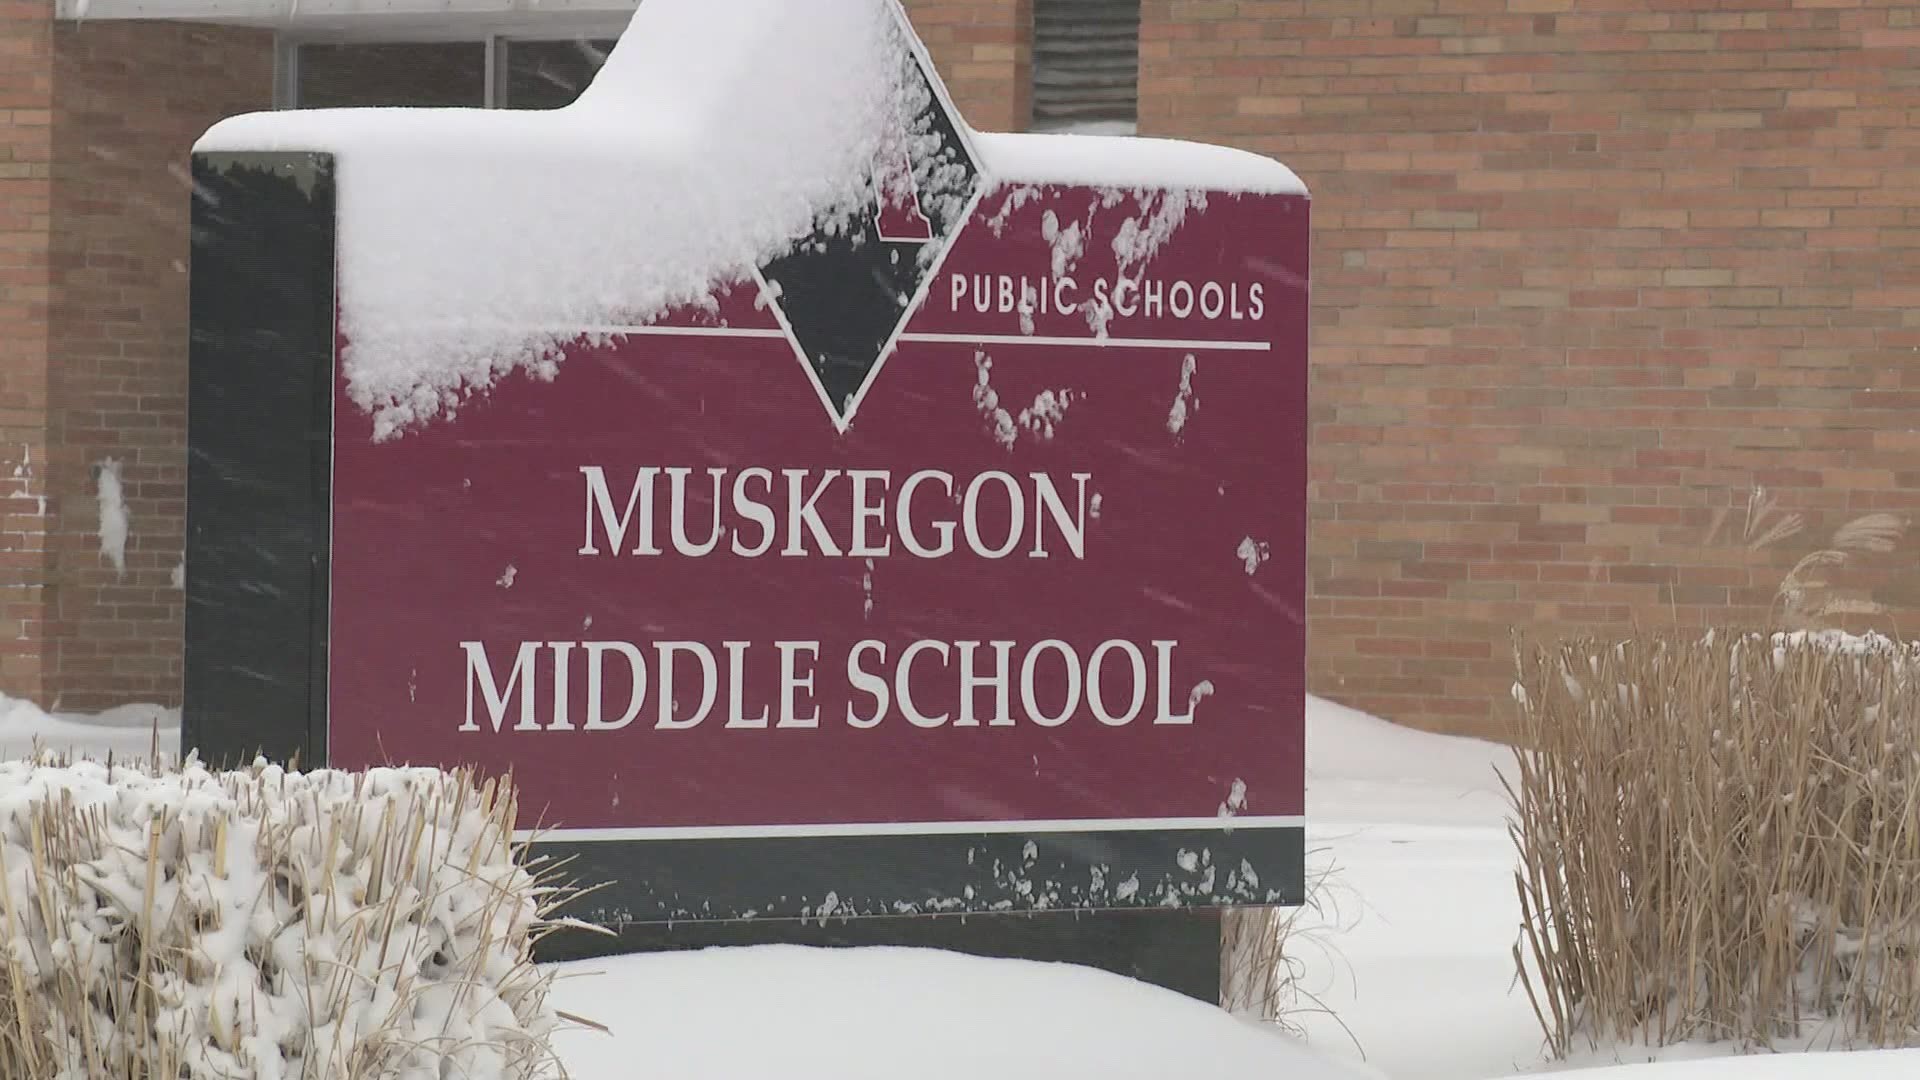 Muskegon Public Schools transitioning to in-person learning in three stages beginning with elementary students starting February 16.